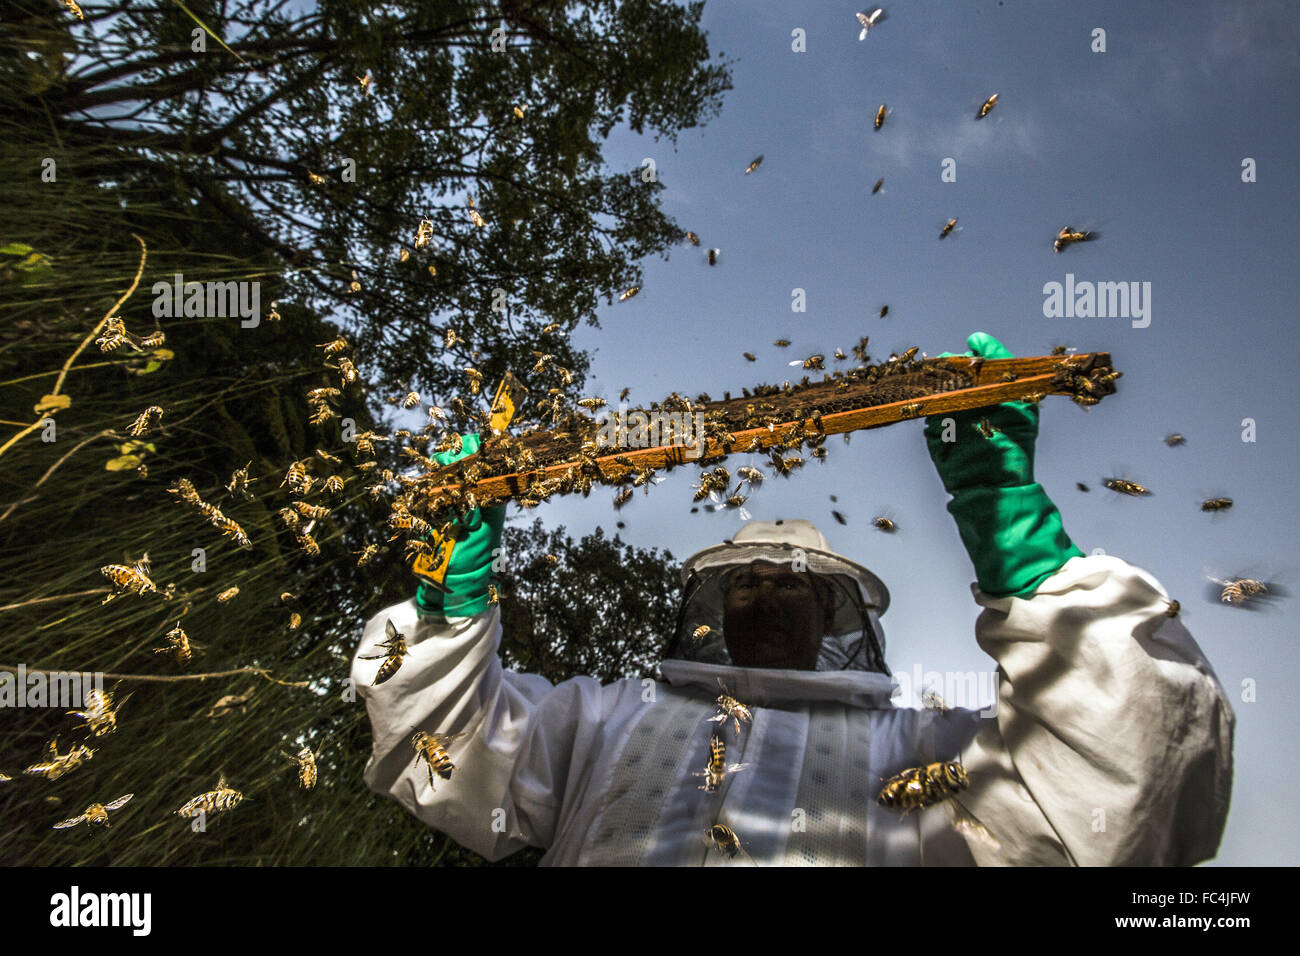 Beekeeper working in apiary honey extraction in the Congonhas district Stock Photo